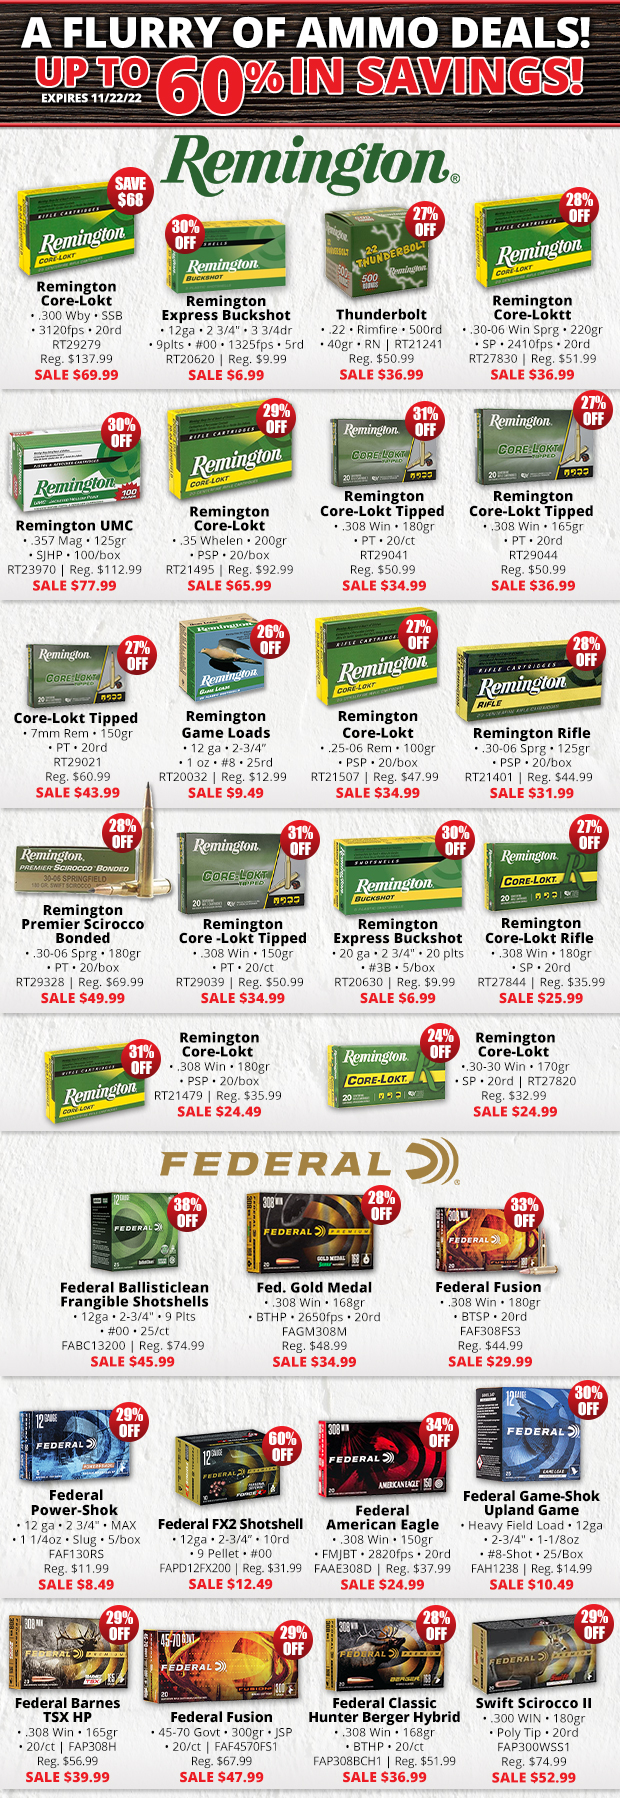 Ammo Sale Up to 60% off!